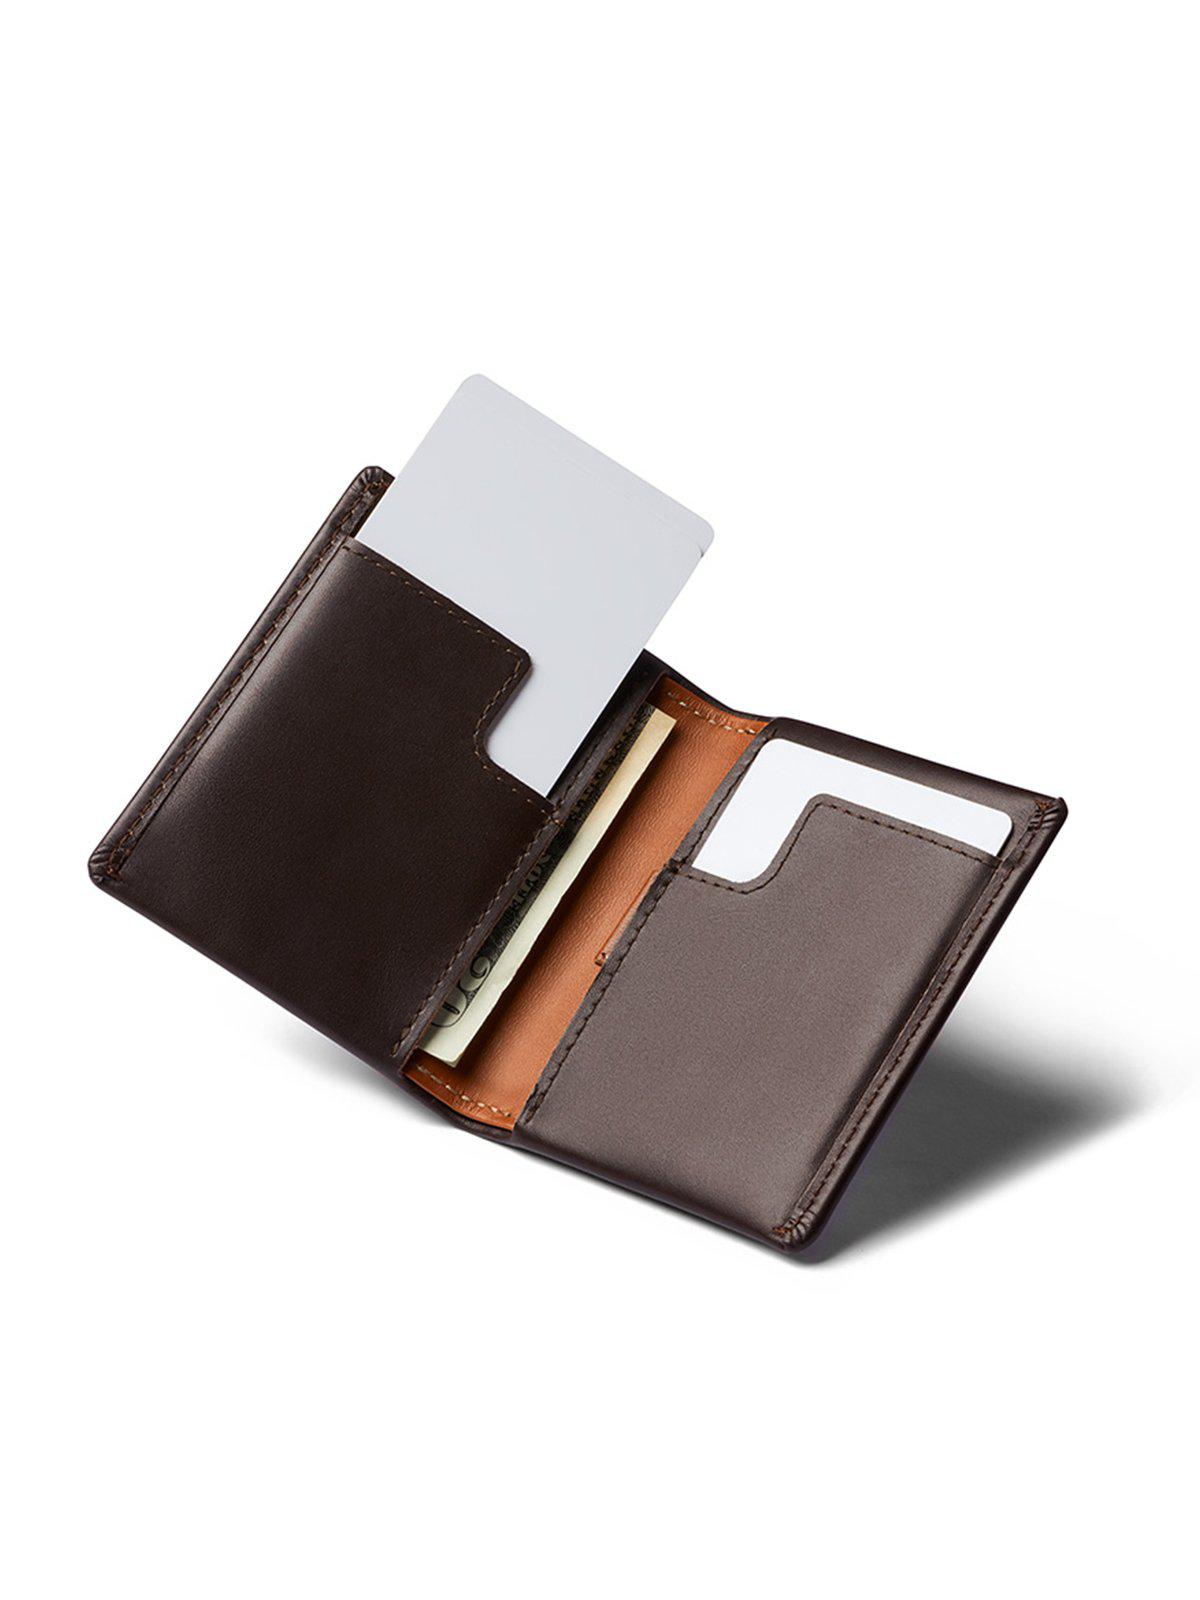 Bellroy Slim Sleeve Wallet Java - MORE by Morello Indonesia